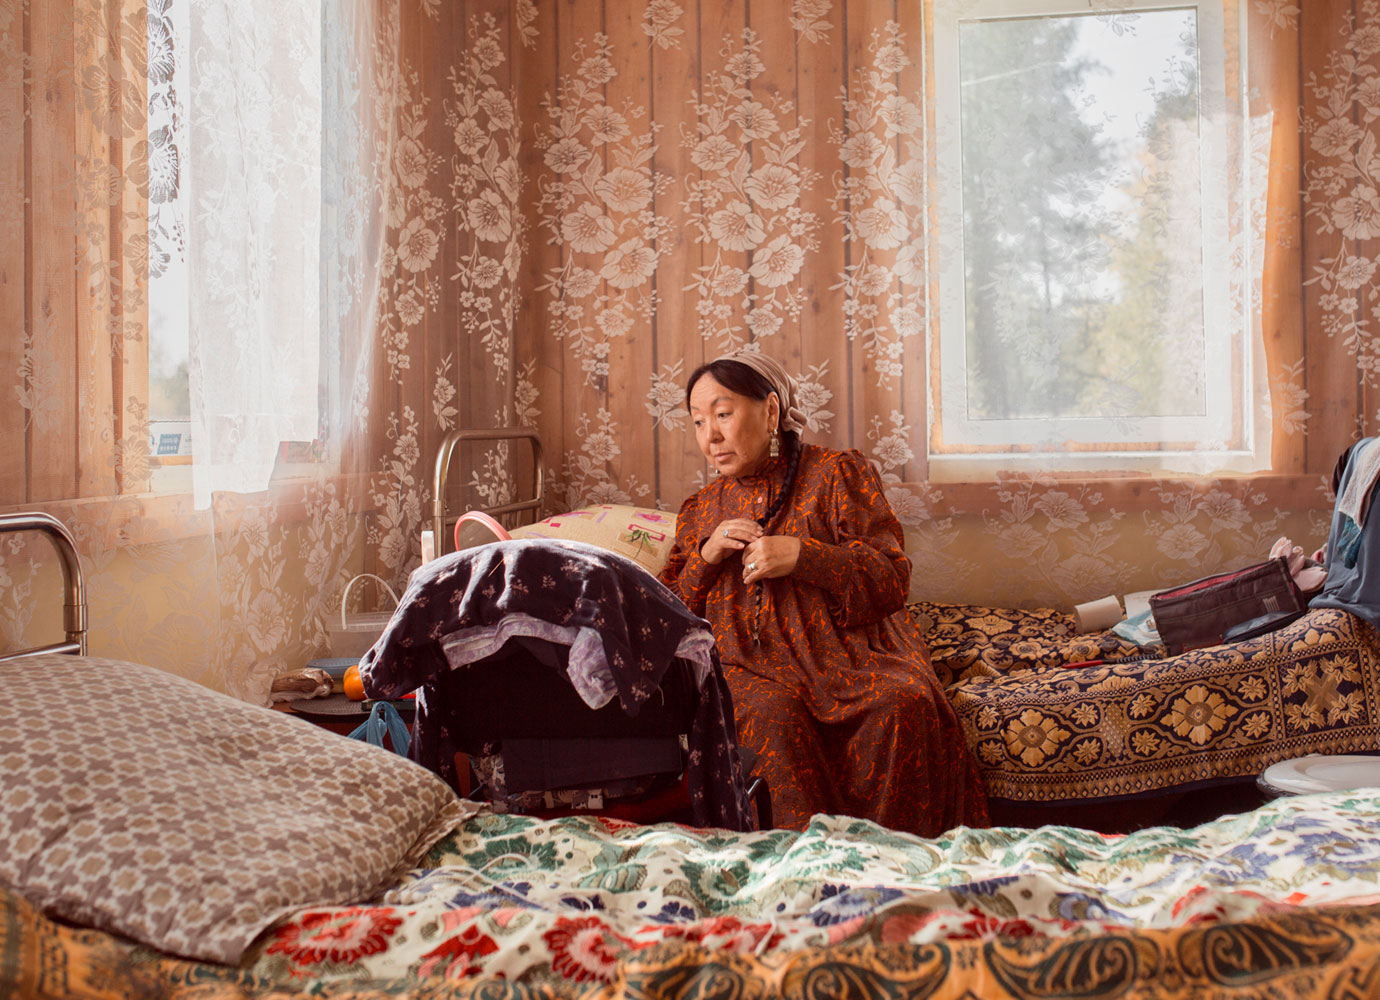 Here are the winners of the 2020 New East Photo Prize 